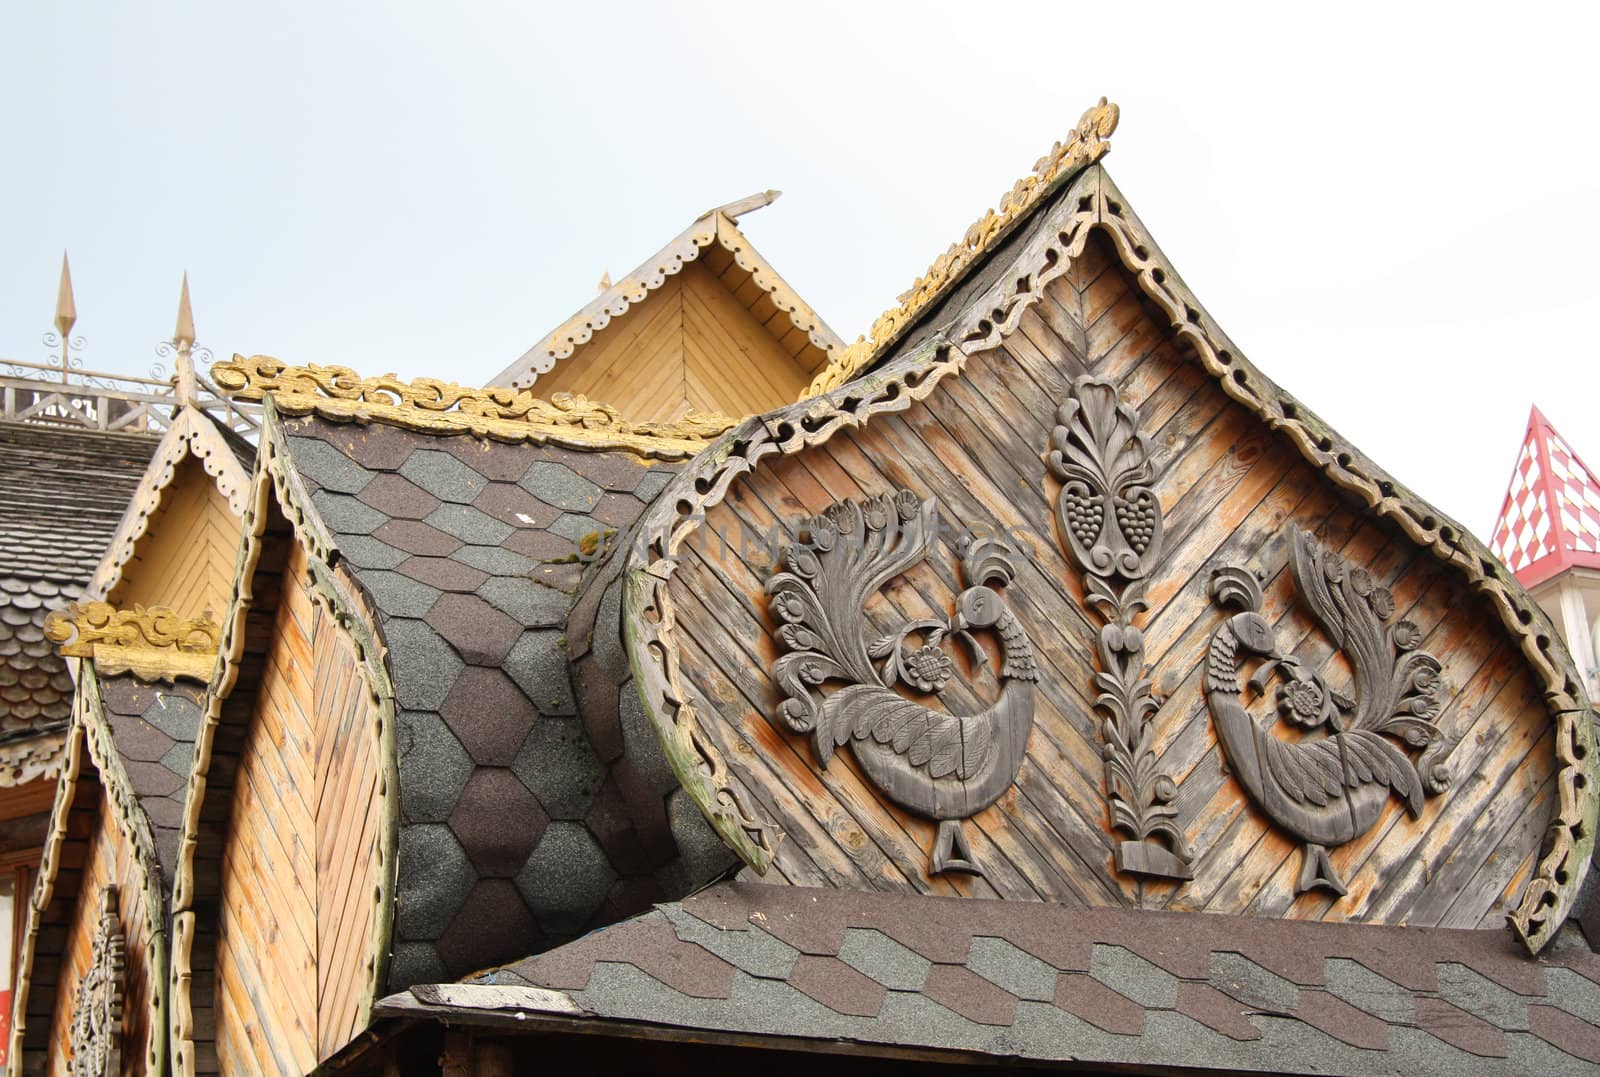 Decorative element of Traditional Russian architecture by jjspring